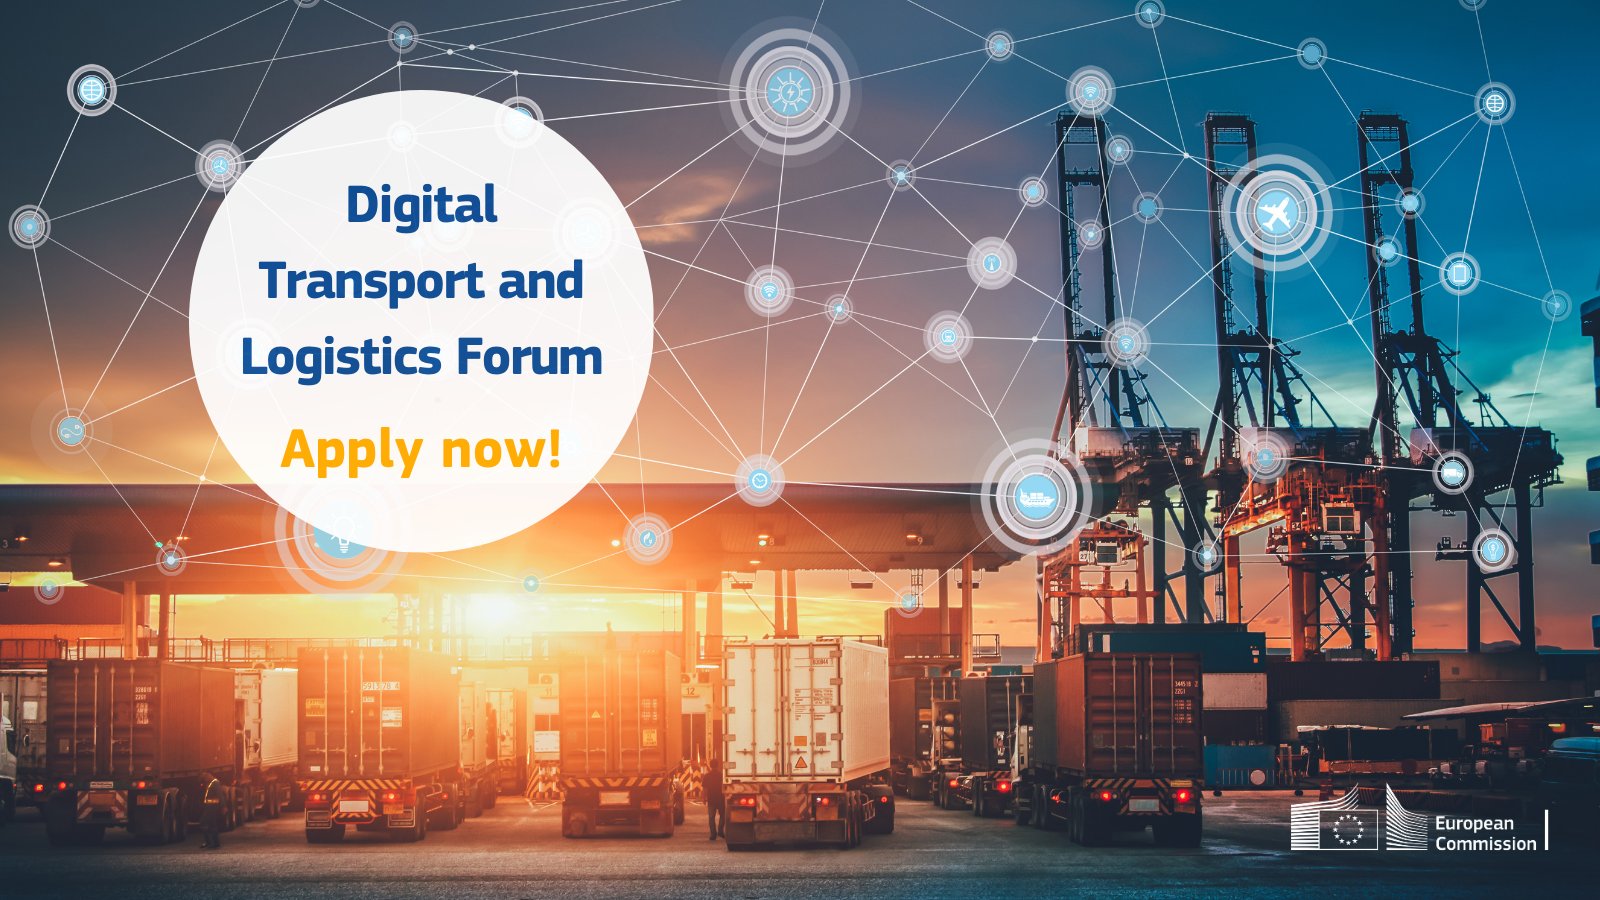 Want to become a member of the EC’s Digital Transport and Logistics Forum?